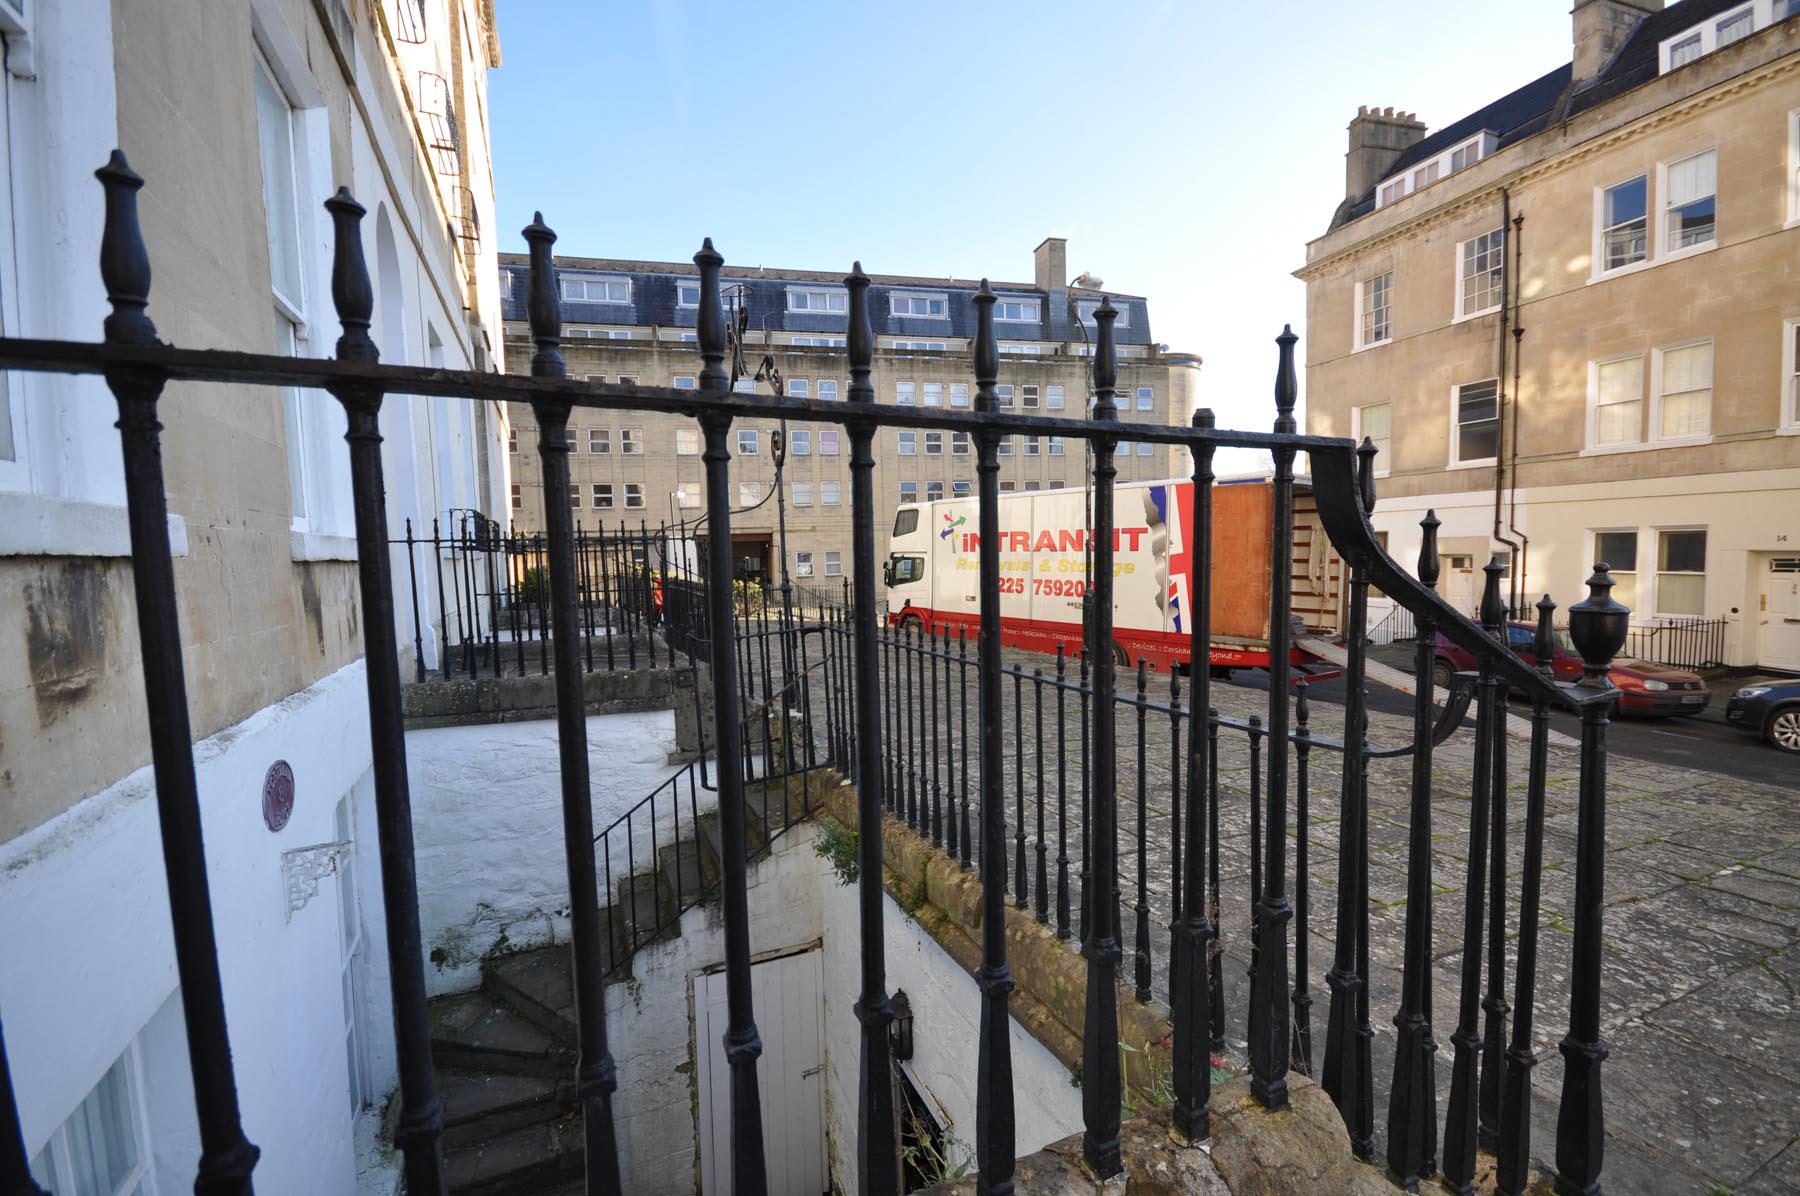 Moving house in Bath